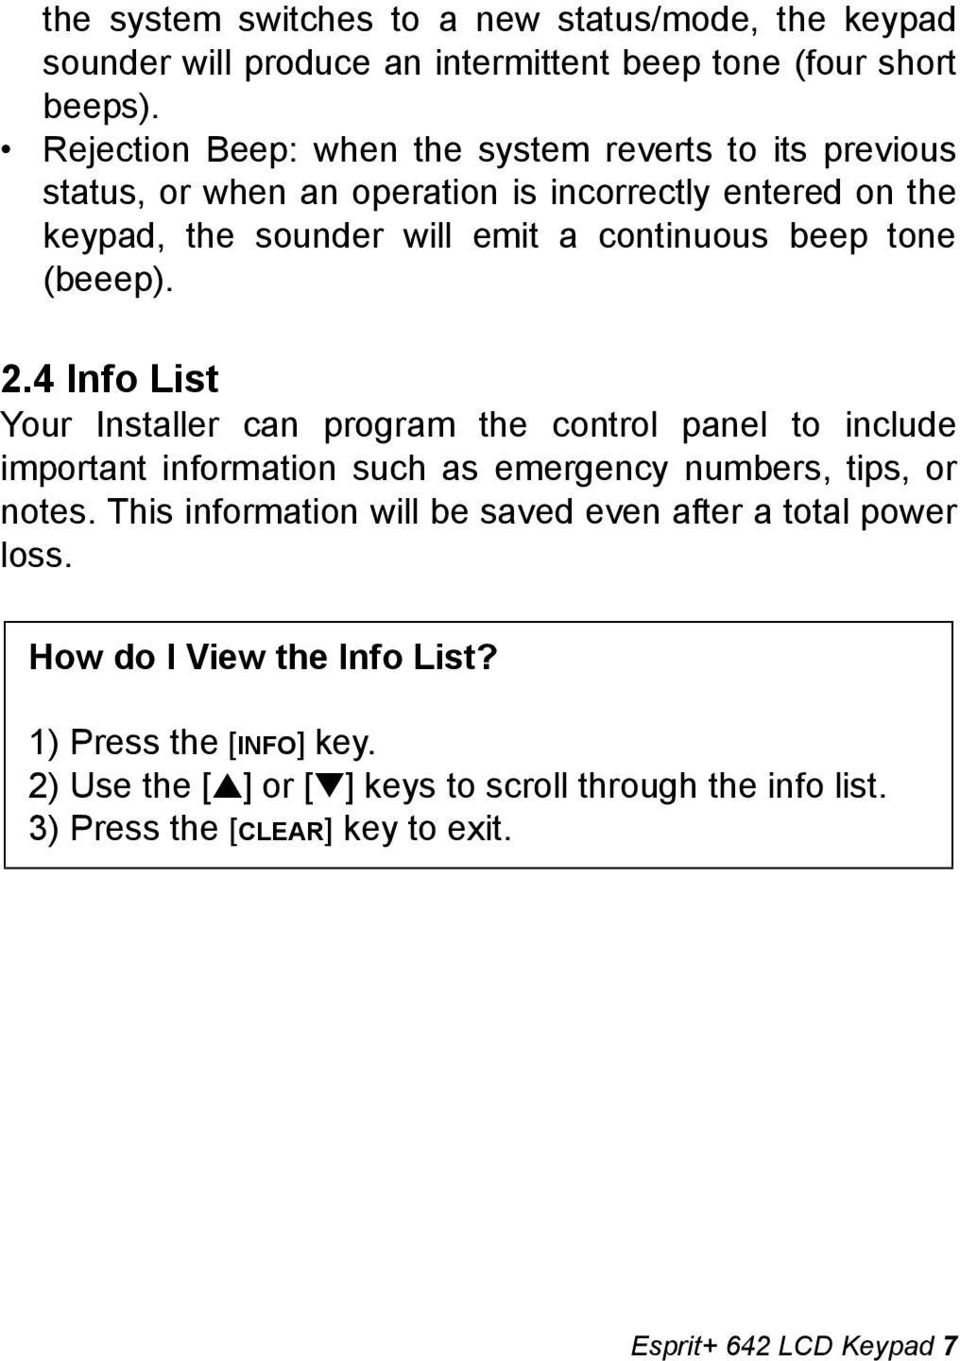 tone (beeep). 2.4 Info List Your Installer can program the control panel to include important information such as emergency numbers, tips, or notes.